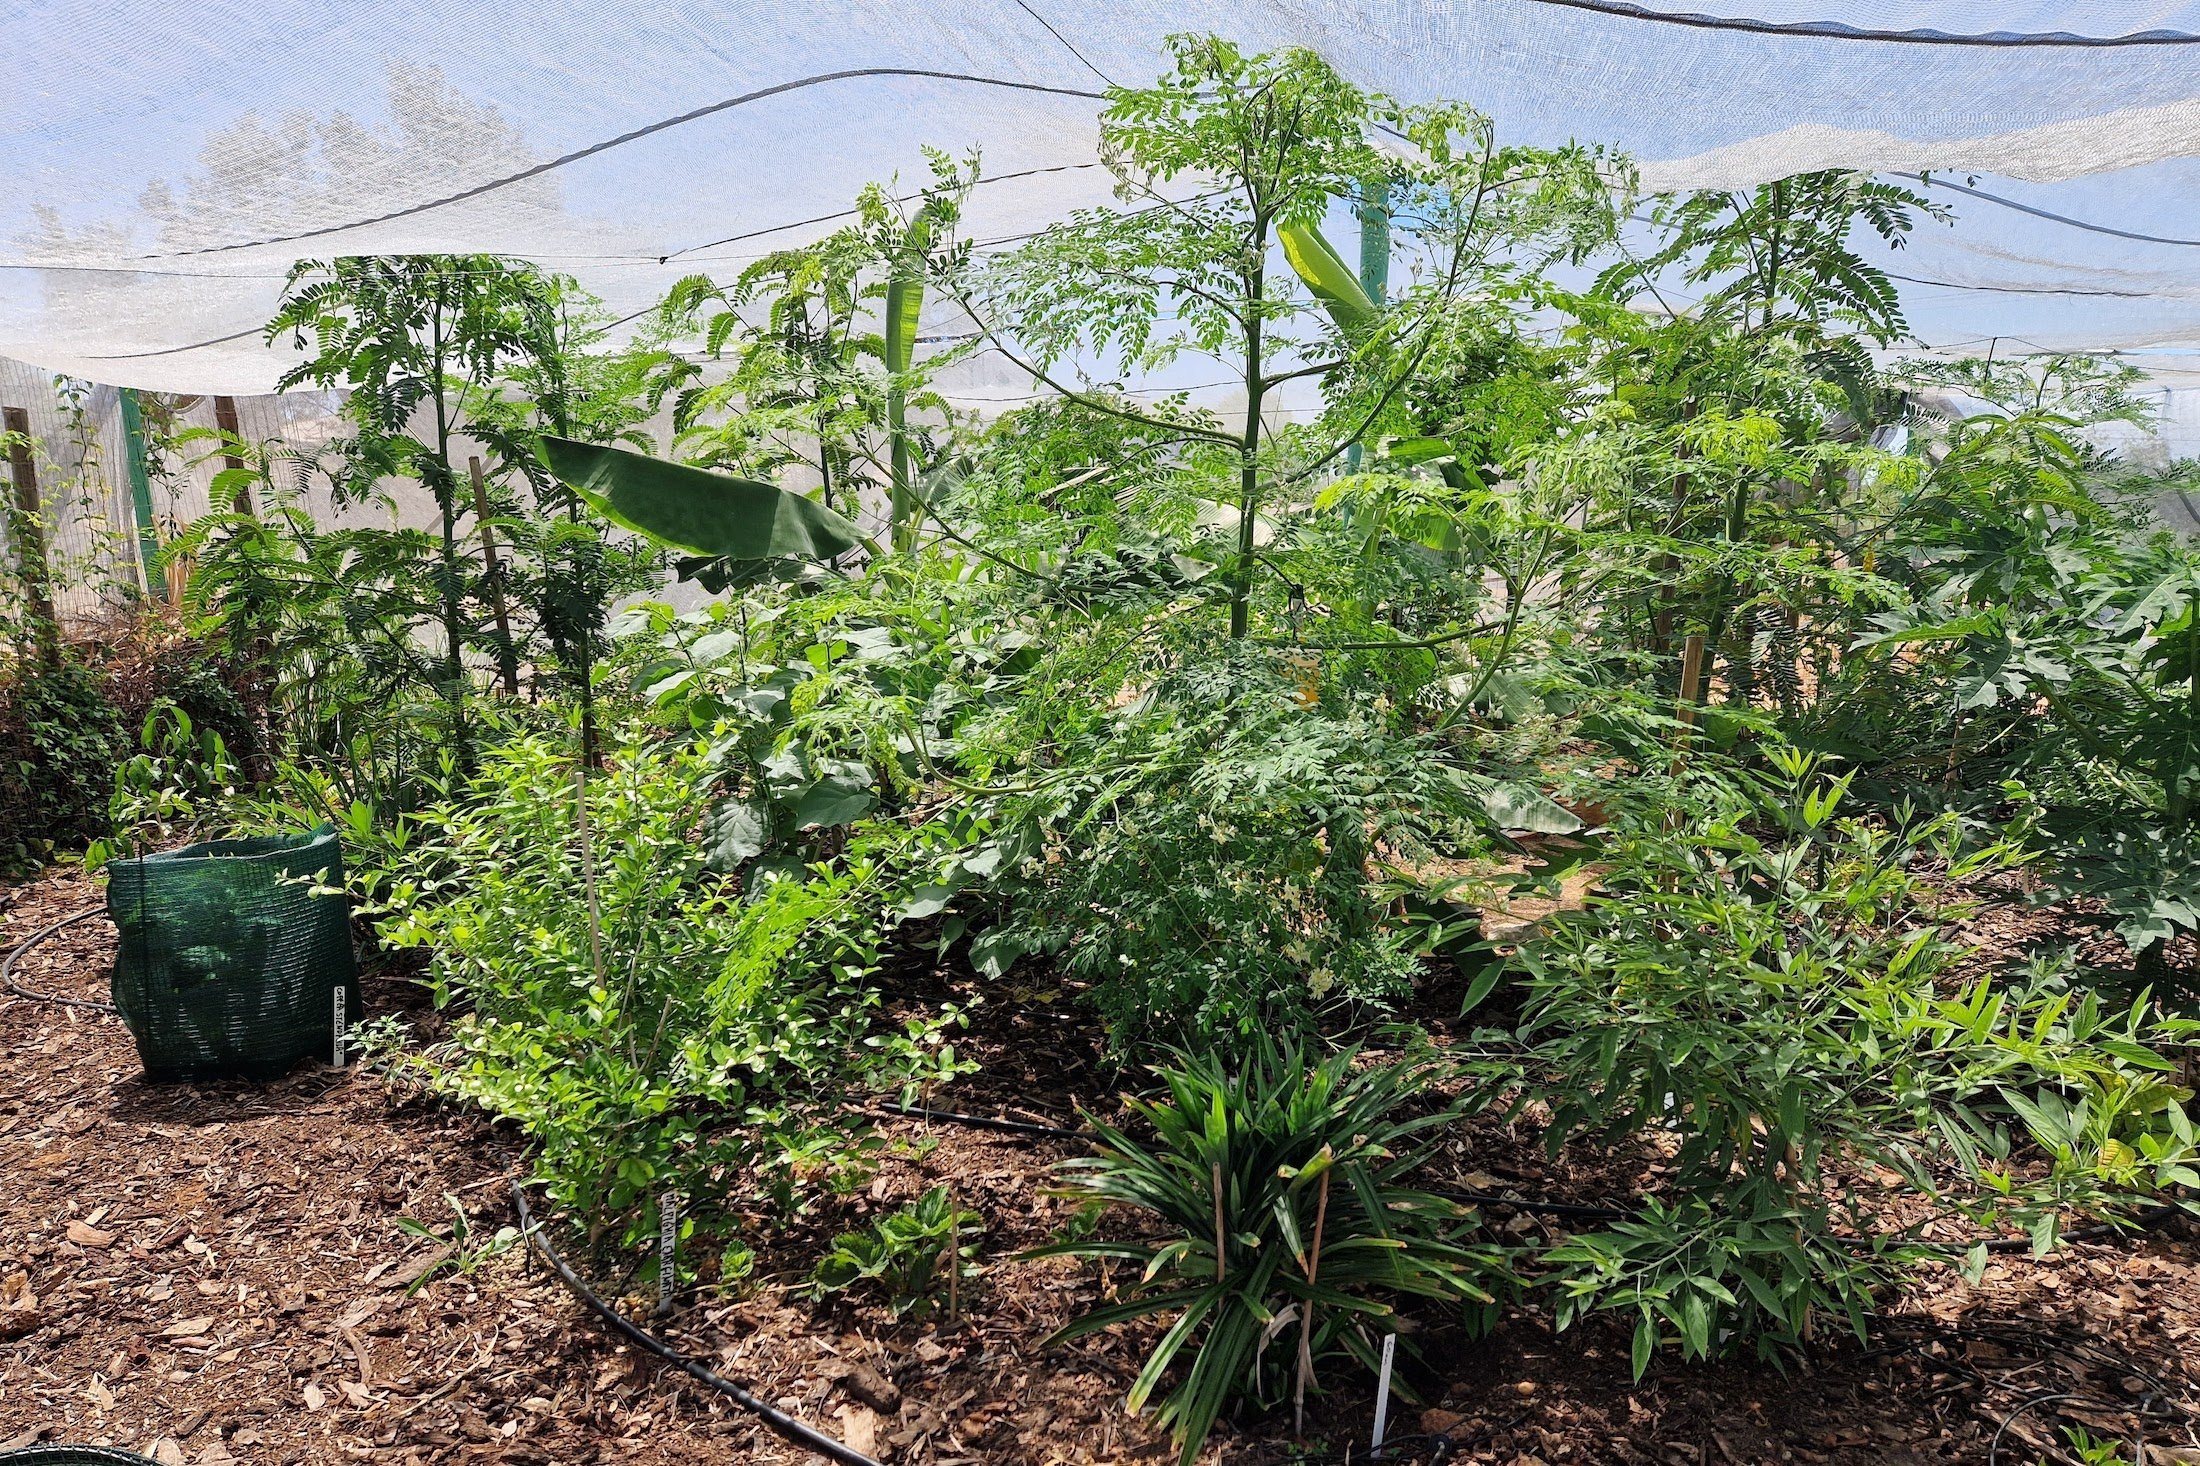 DAY 45 — the Miyawaki-inspired Food Forest experiment #3 (Semi-organized), on August 14th 2023